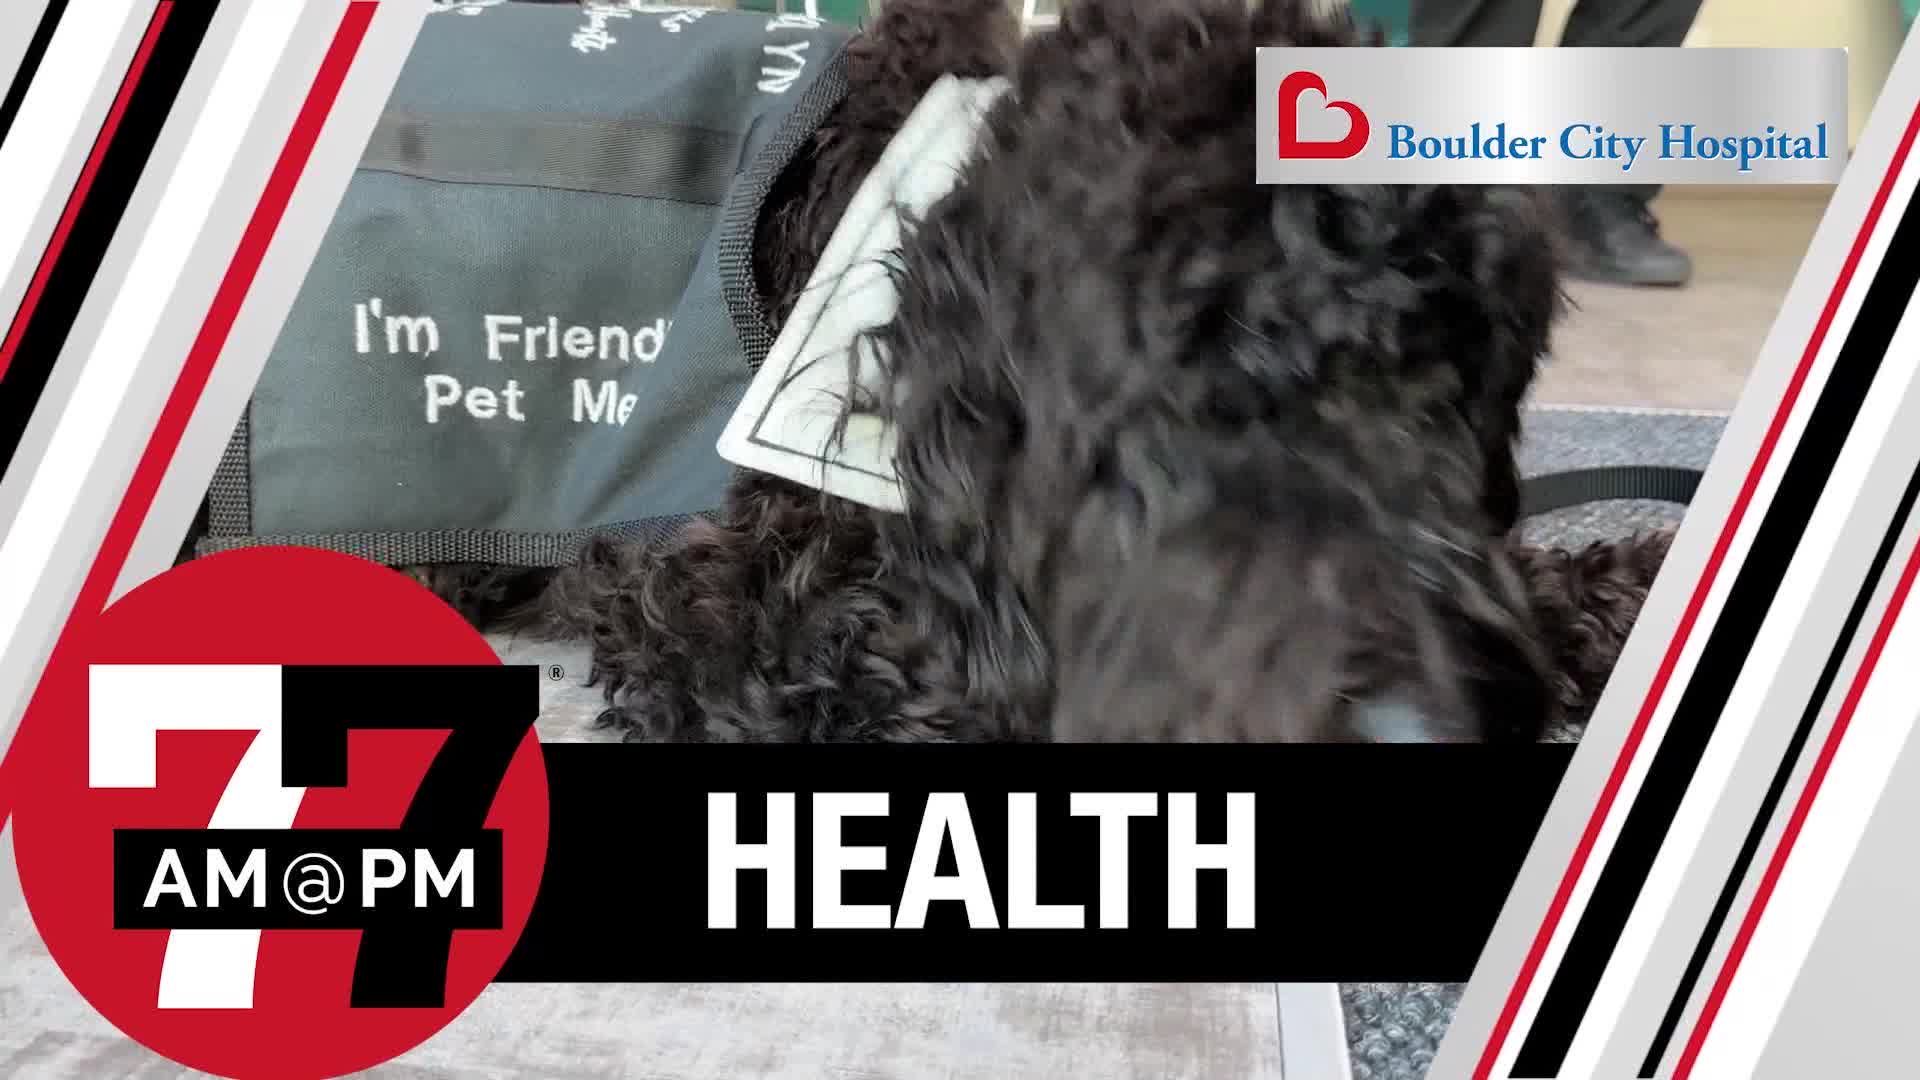 Therapy Dog provides mental health support